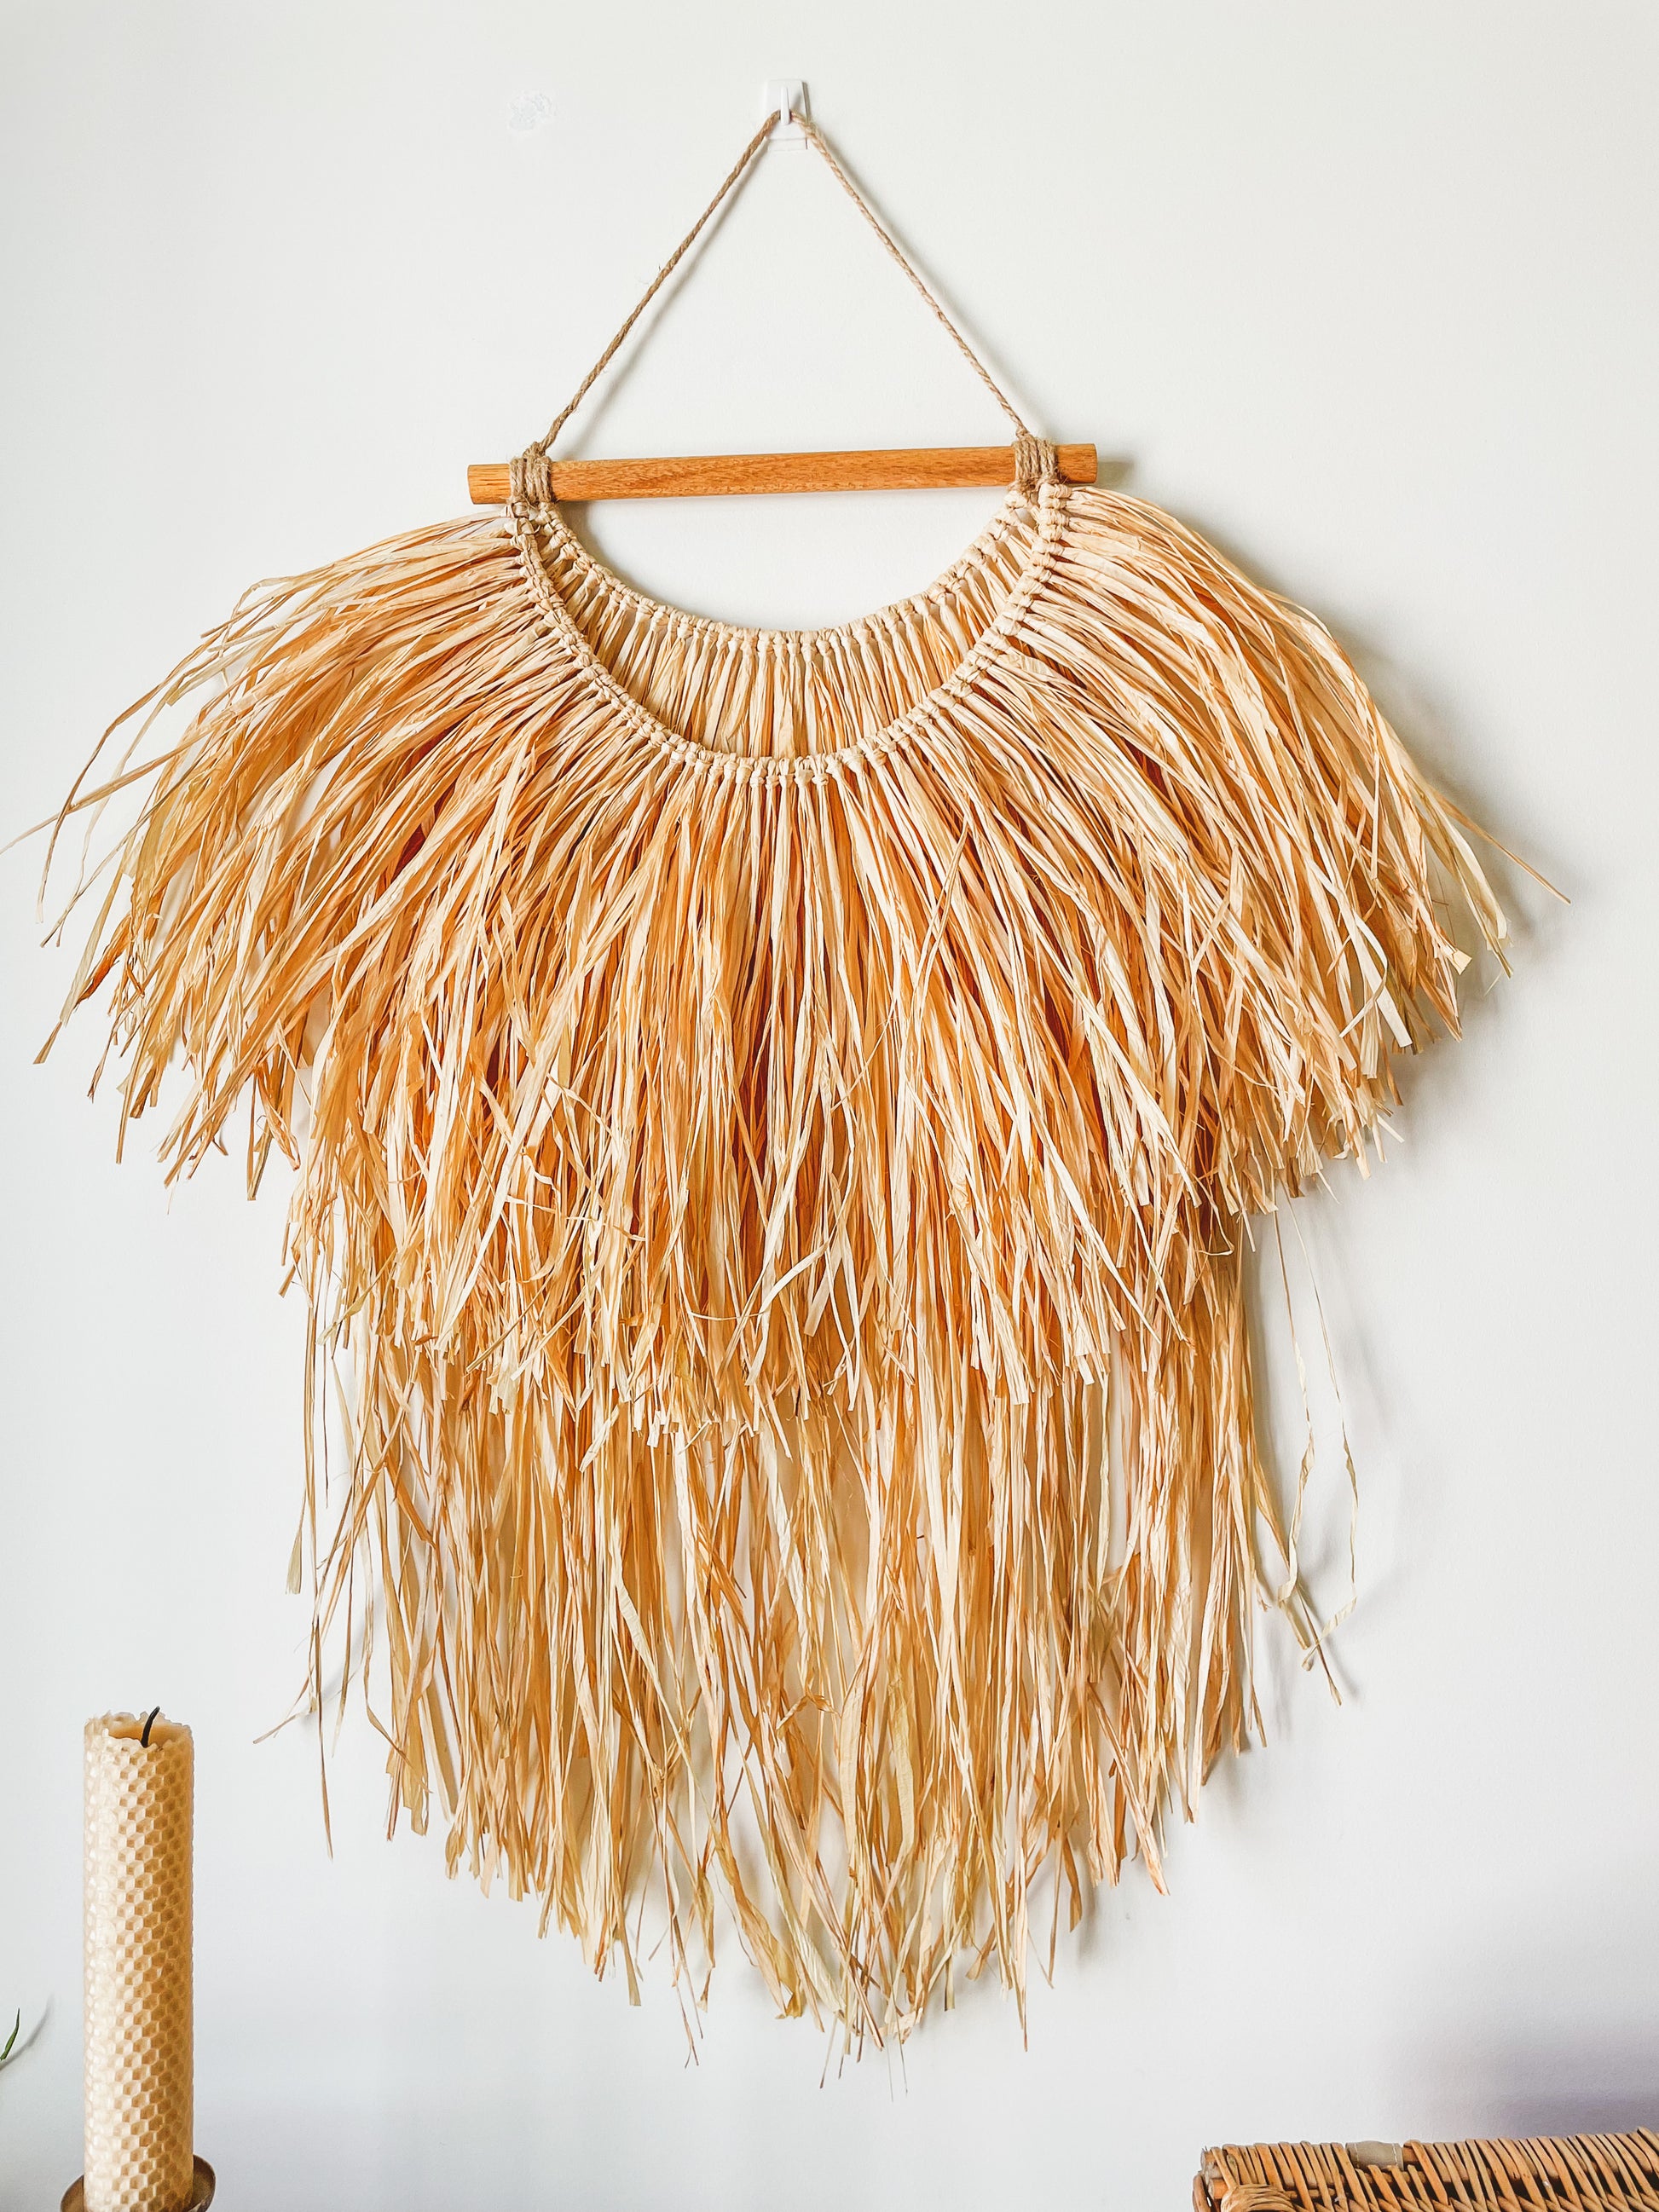 Closeup view of a raffia wall hanging hanged on a wall